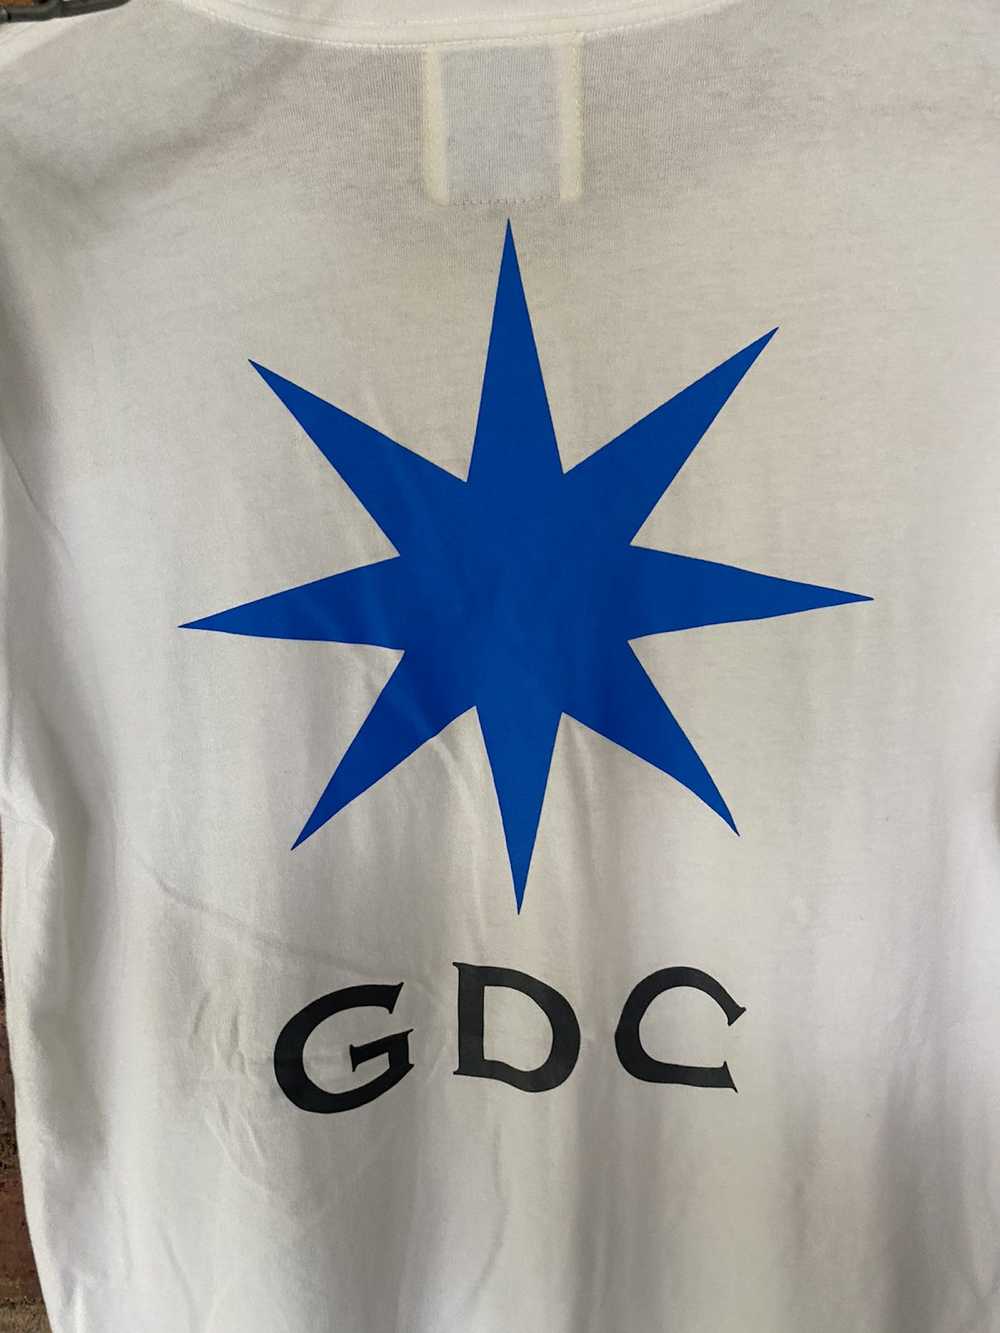 Japanese Brand × Narcotic Gdc × Streetwear Iconic… - image 5